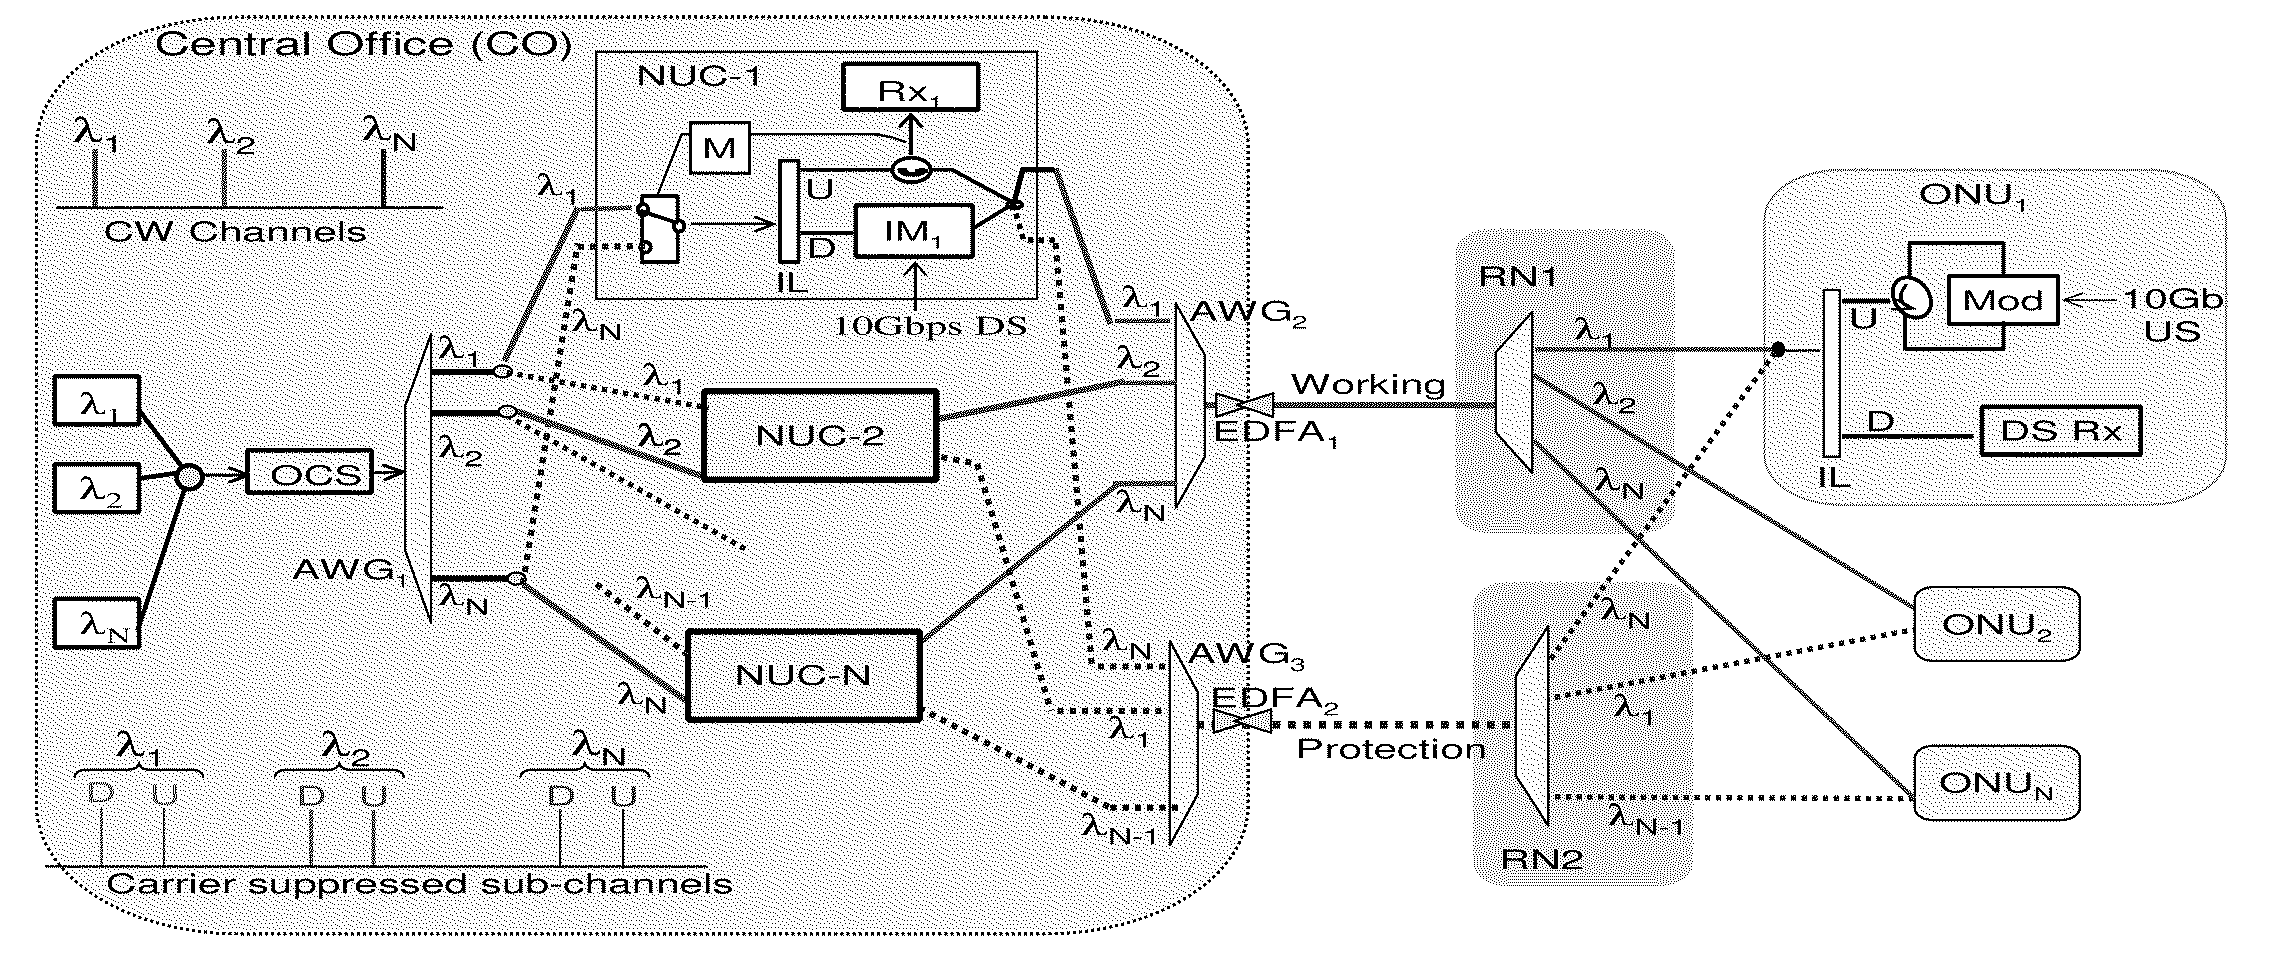 Centrally Managed, Self-Survivable Wavelength Division Multiplexed Passive Optical Network